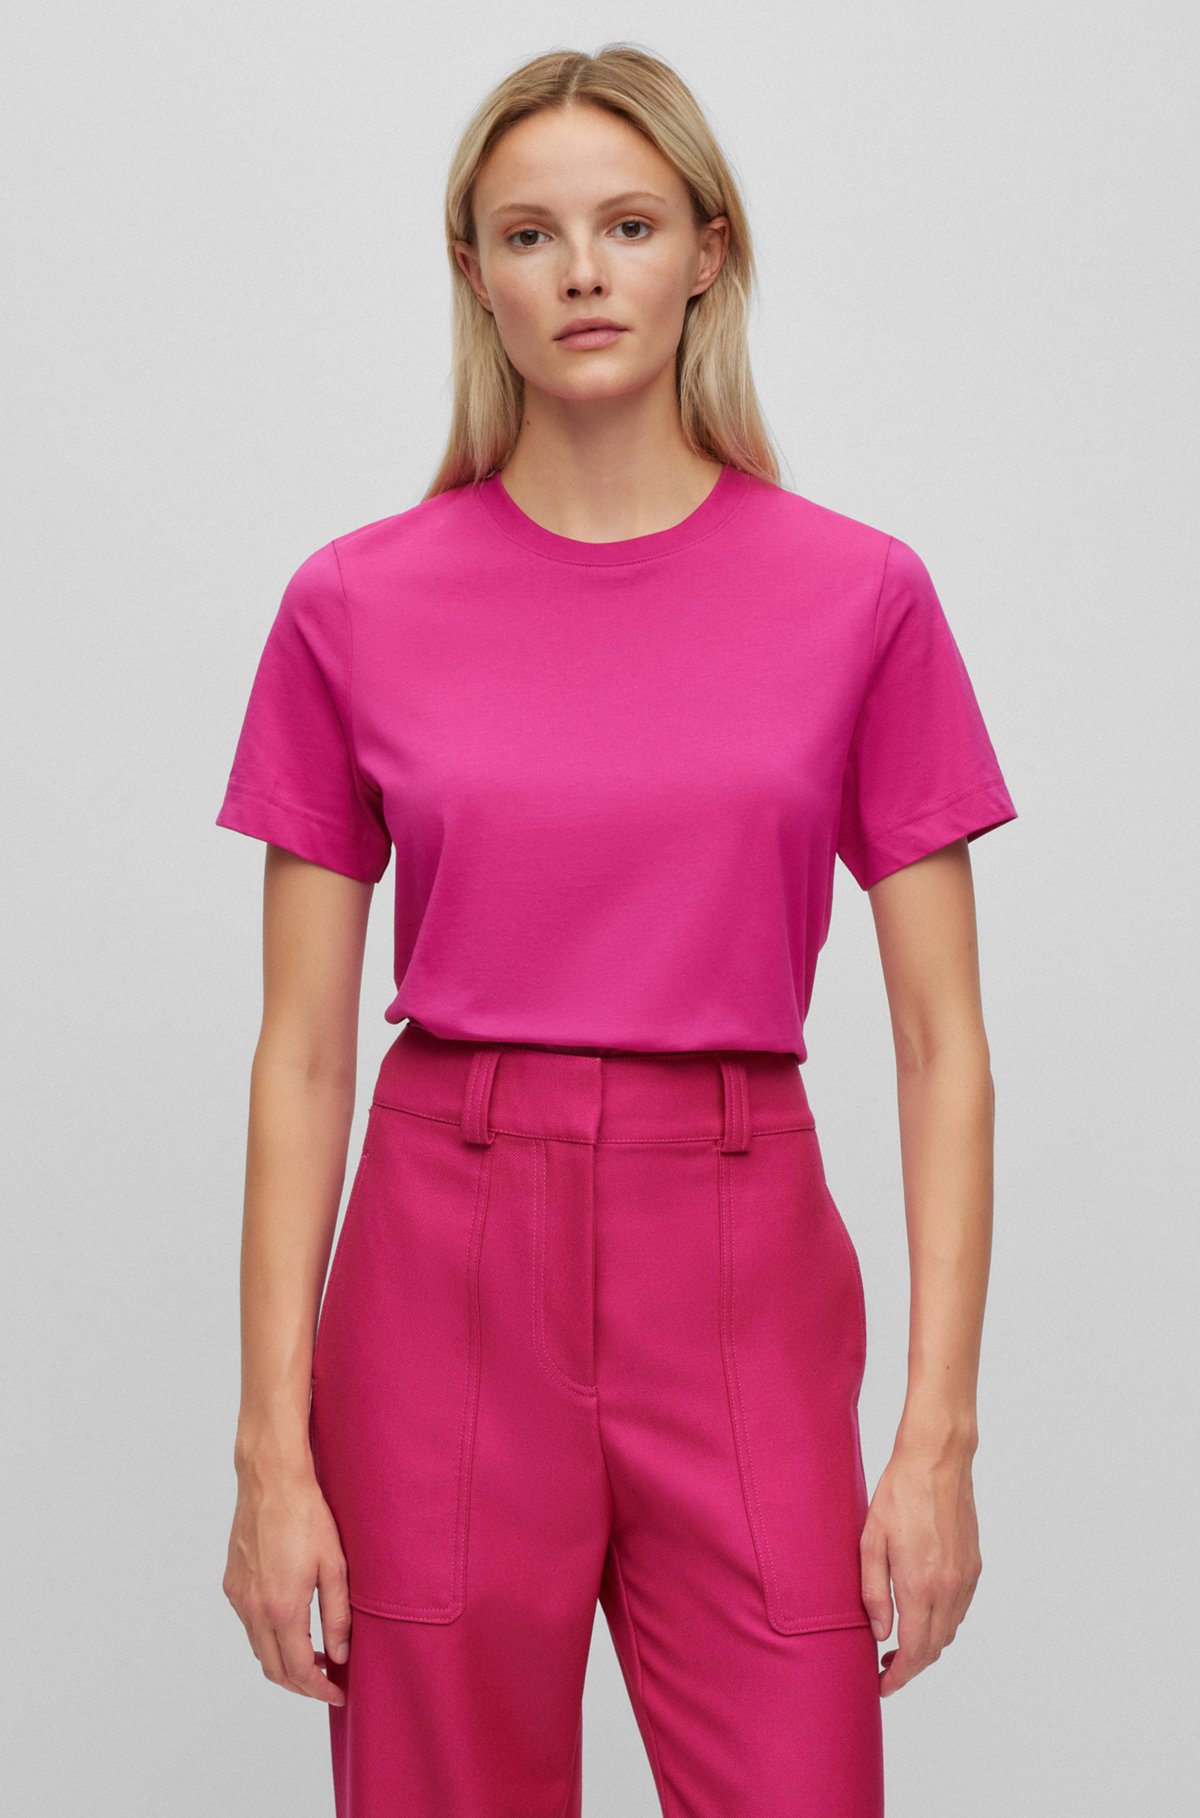 Relaxed-fit T-shirt in cotton jersey, Pink